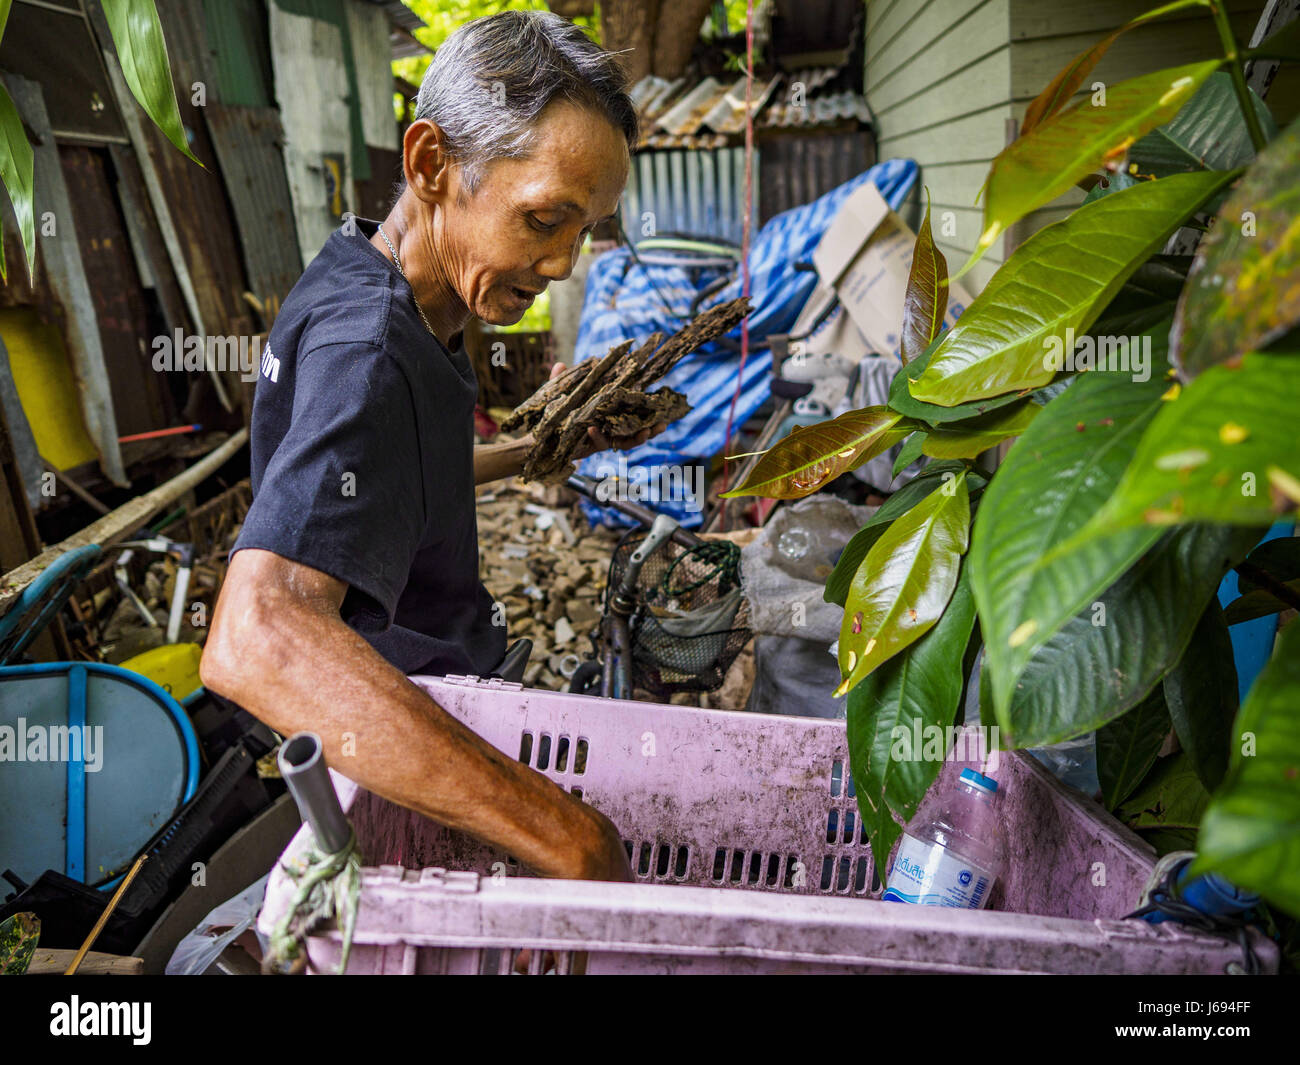 May 20, 2017 - Bangkok, Bangkok, Thailand - A man who will be evicted from Pom Mahakan looks for recyclables on the site of a home that was razed by Bangkok city government officials during a previous eviction in the fort. The final evictions of the remaining families in Pom Mahakan, a slum community in a 19th century fort in Bangkok, have started. City officials are moving the residents out of the fort. NGOs and historic preservation organizations protested the city's action but city officials did not relent and started evicting the remaining families in early March. (Credit Image: © Jack Kur Stock Photo